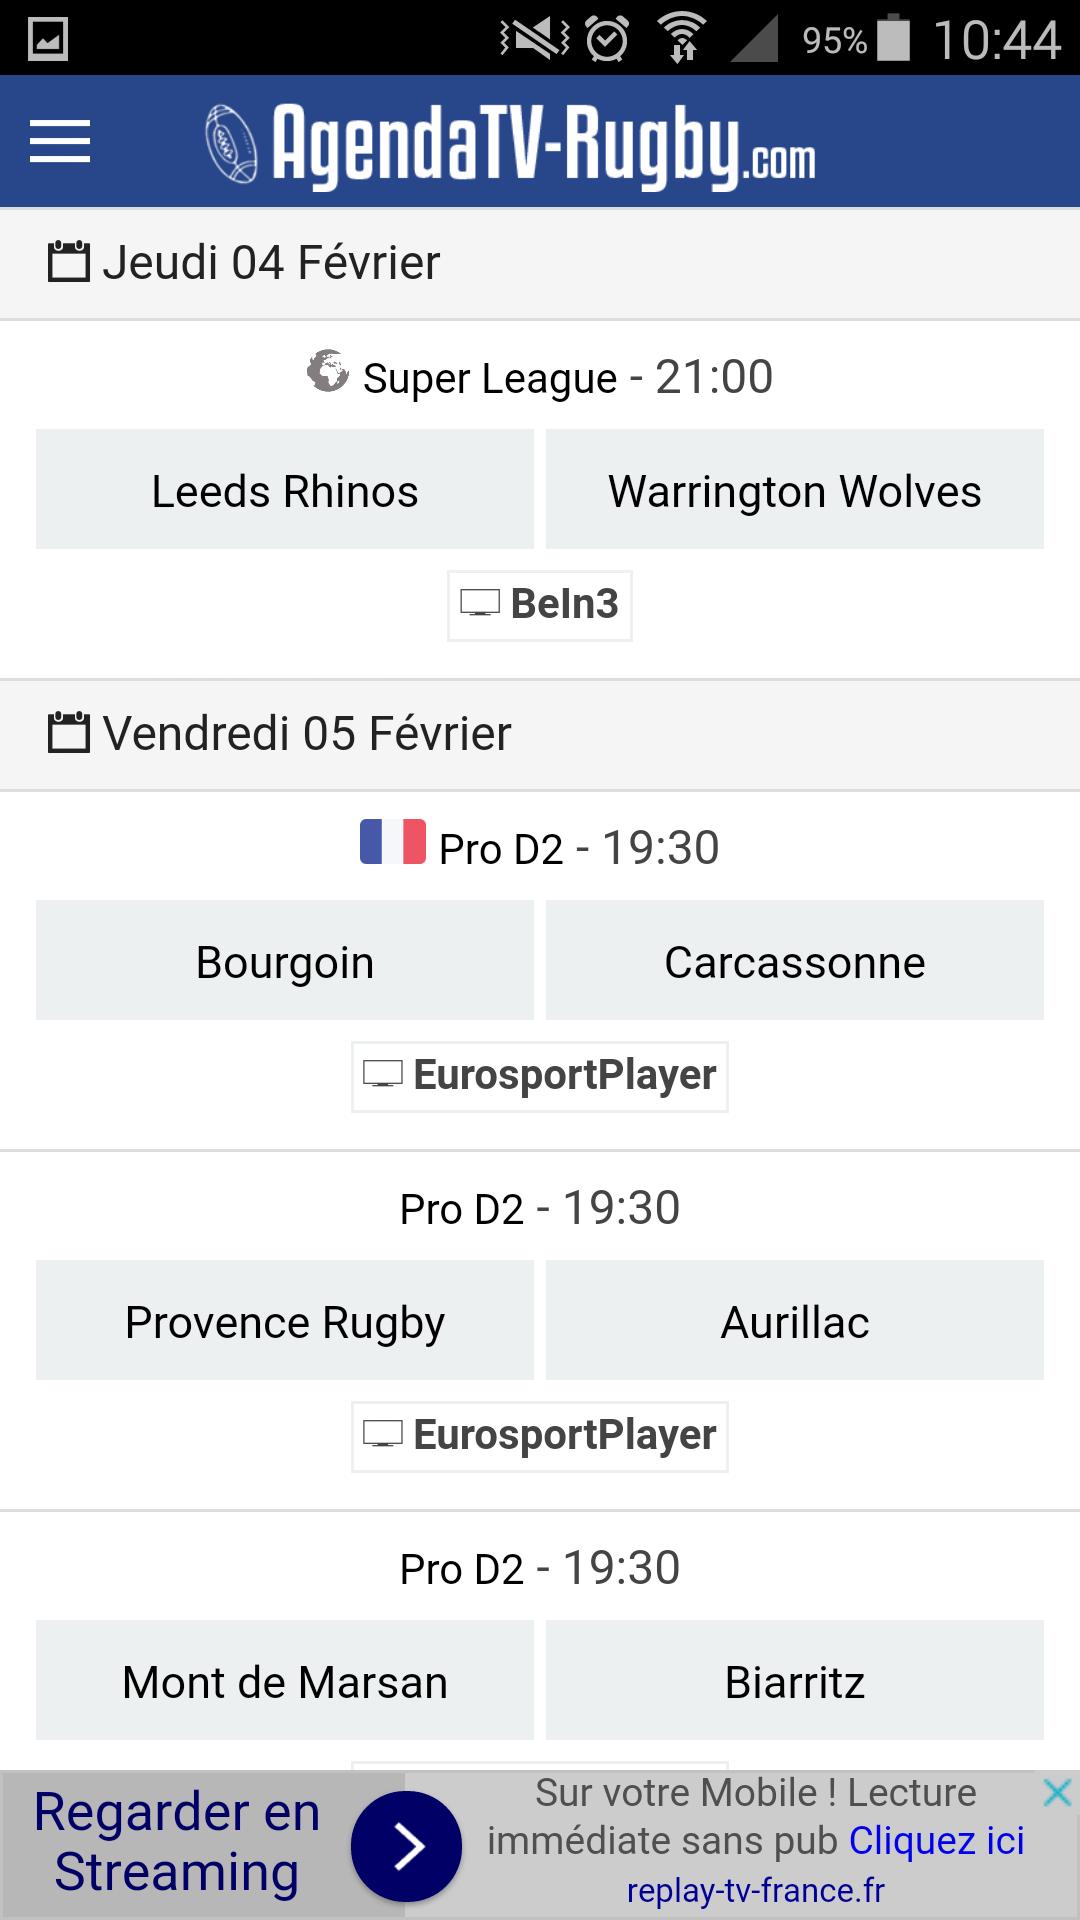 Agenda TV Rugby for Android - APK Download